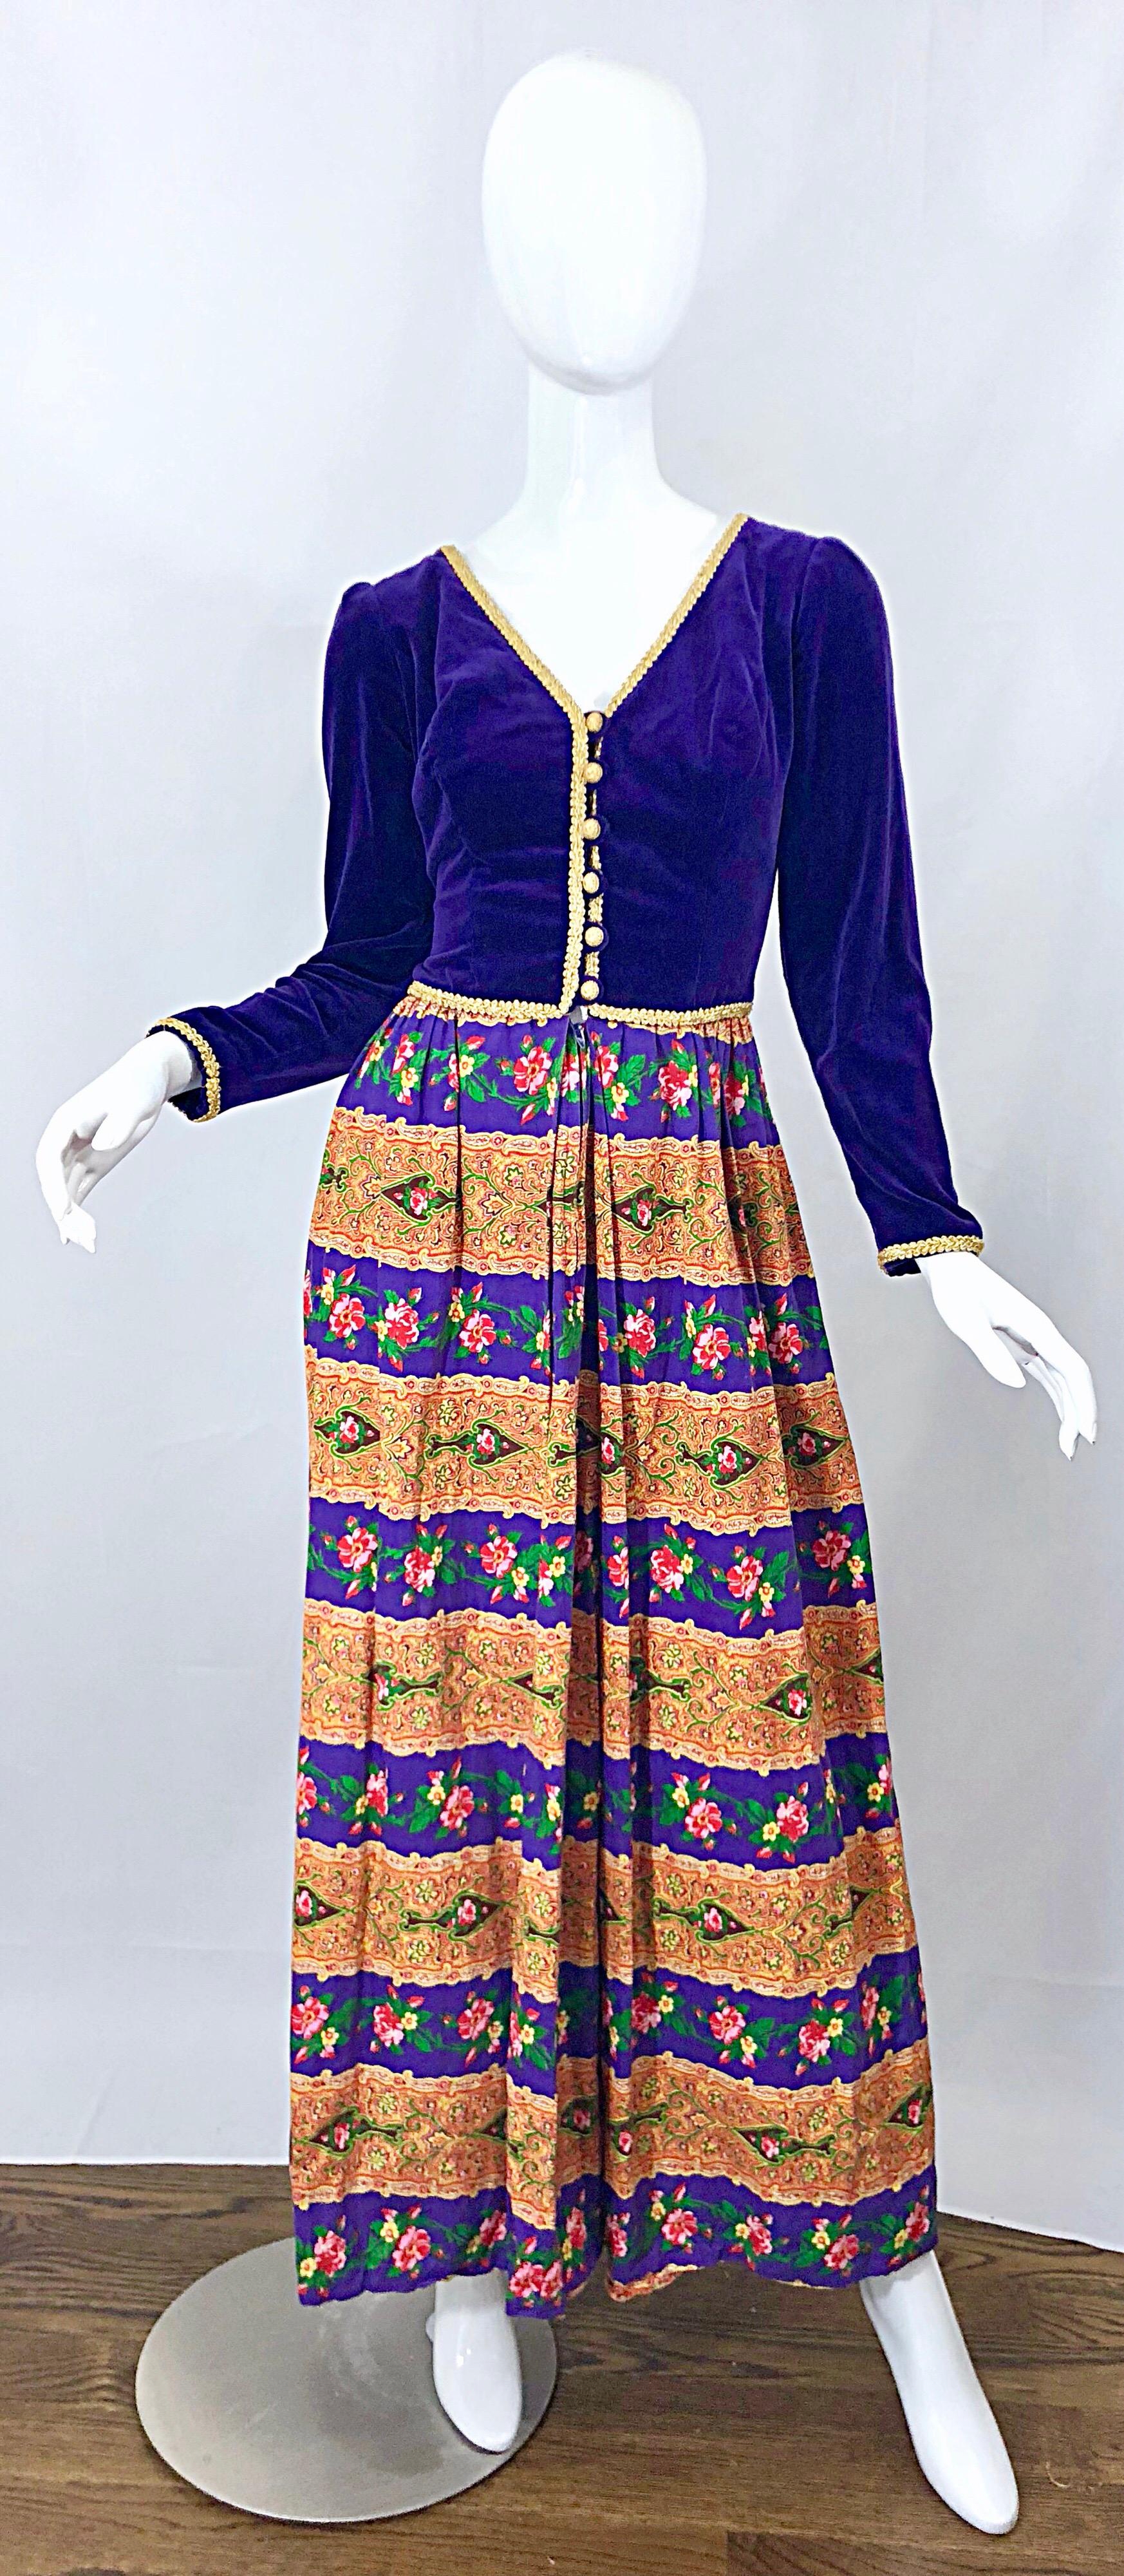 Incredible vintage 70s JAY MORLEY for FERN VIOLETTE regal purple velvet and cotton boho chic Renaissance maxi dress / gown! Features a beautiful purple cotton velvet long sleeve bodice, with gold embroidery along the neck, waistband, sleeve cuffs,